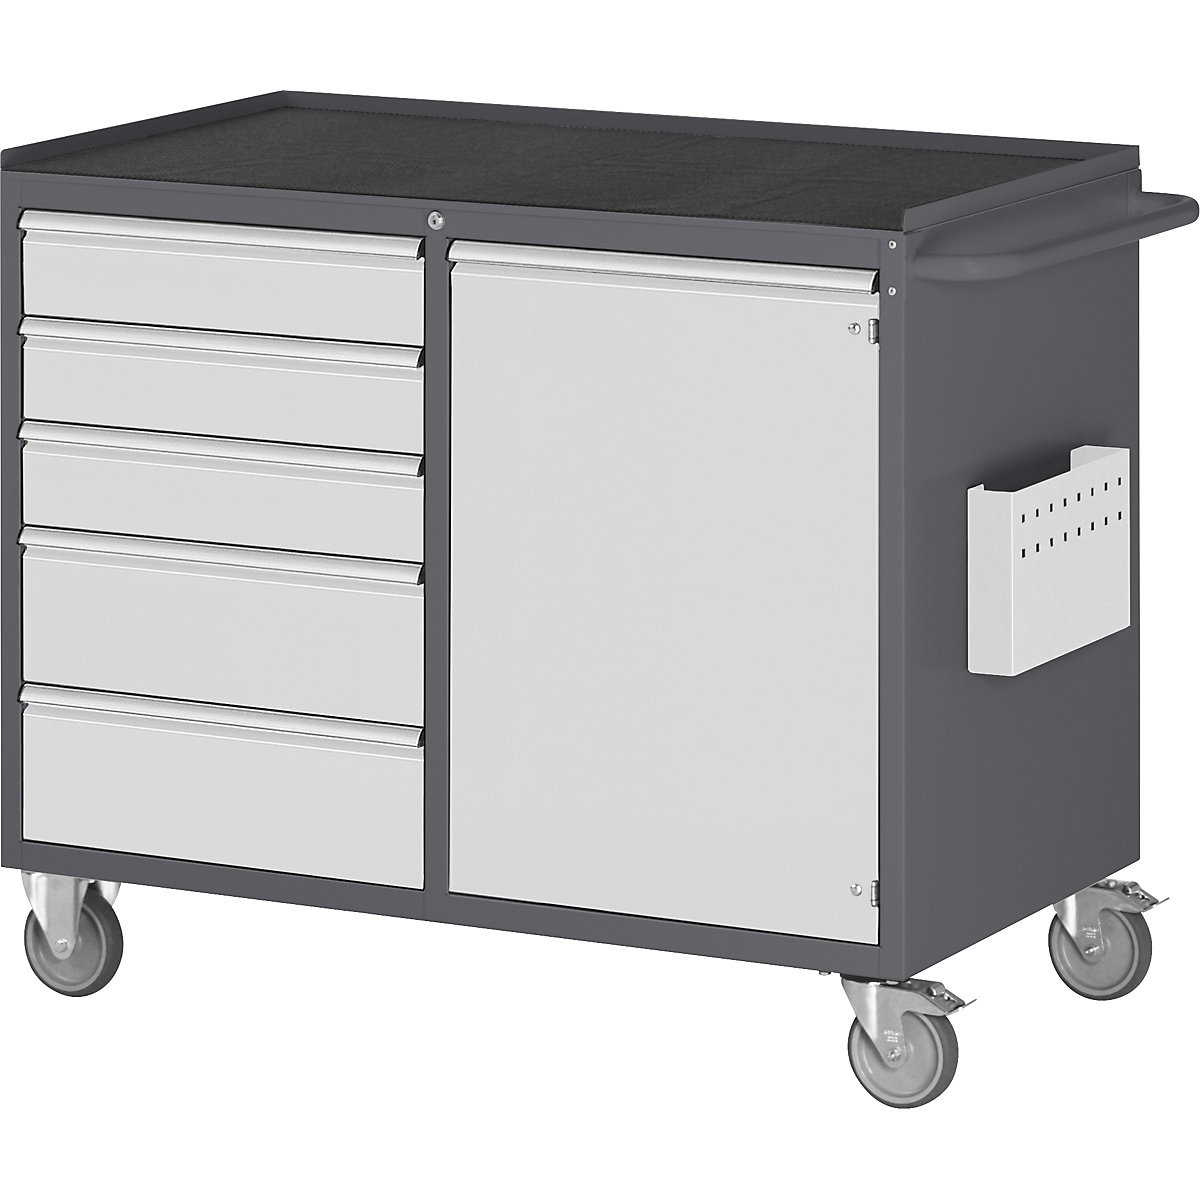 Compact workbenches, mobile – RAU, 5 drawers, 1 door, metal tray with rubber mat, charcoal / light grey-4